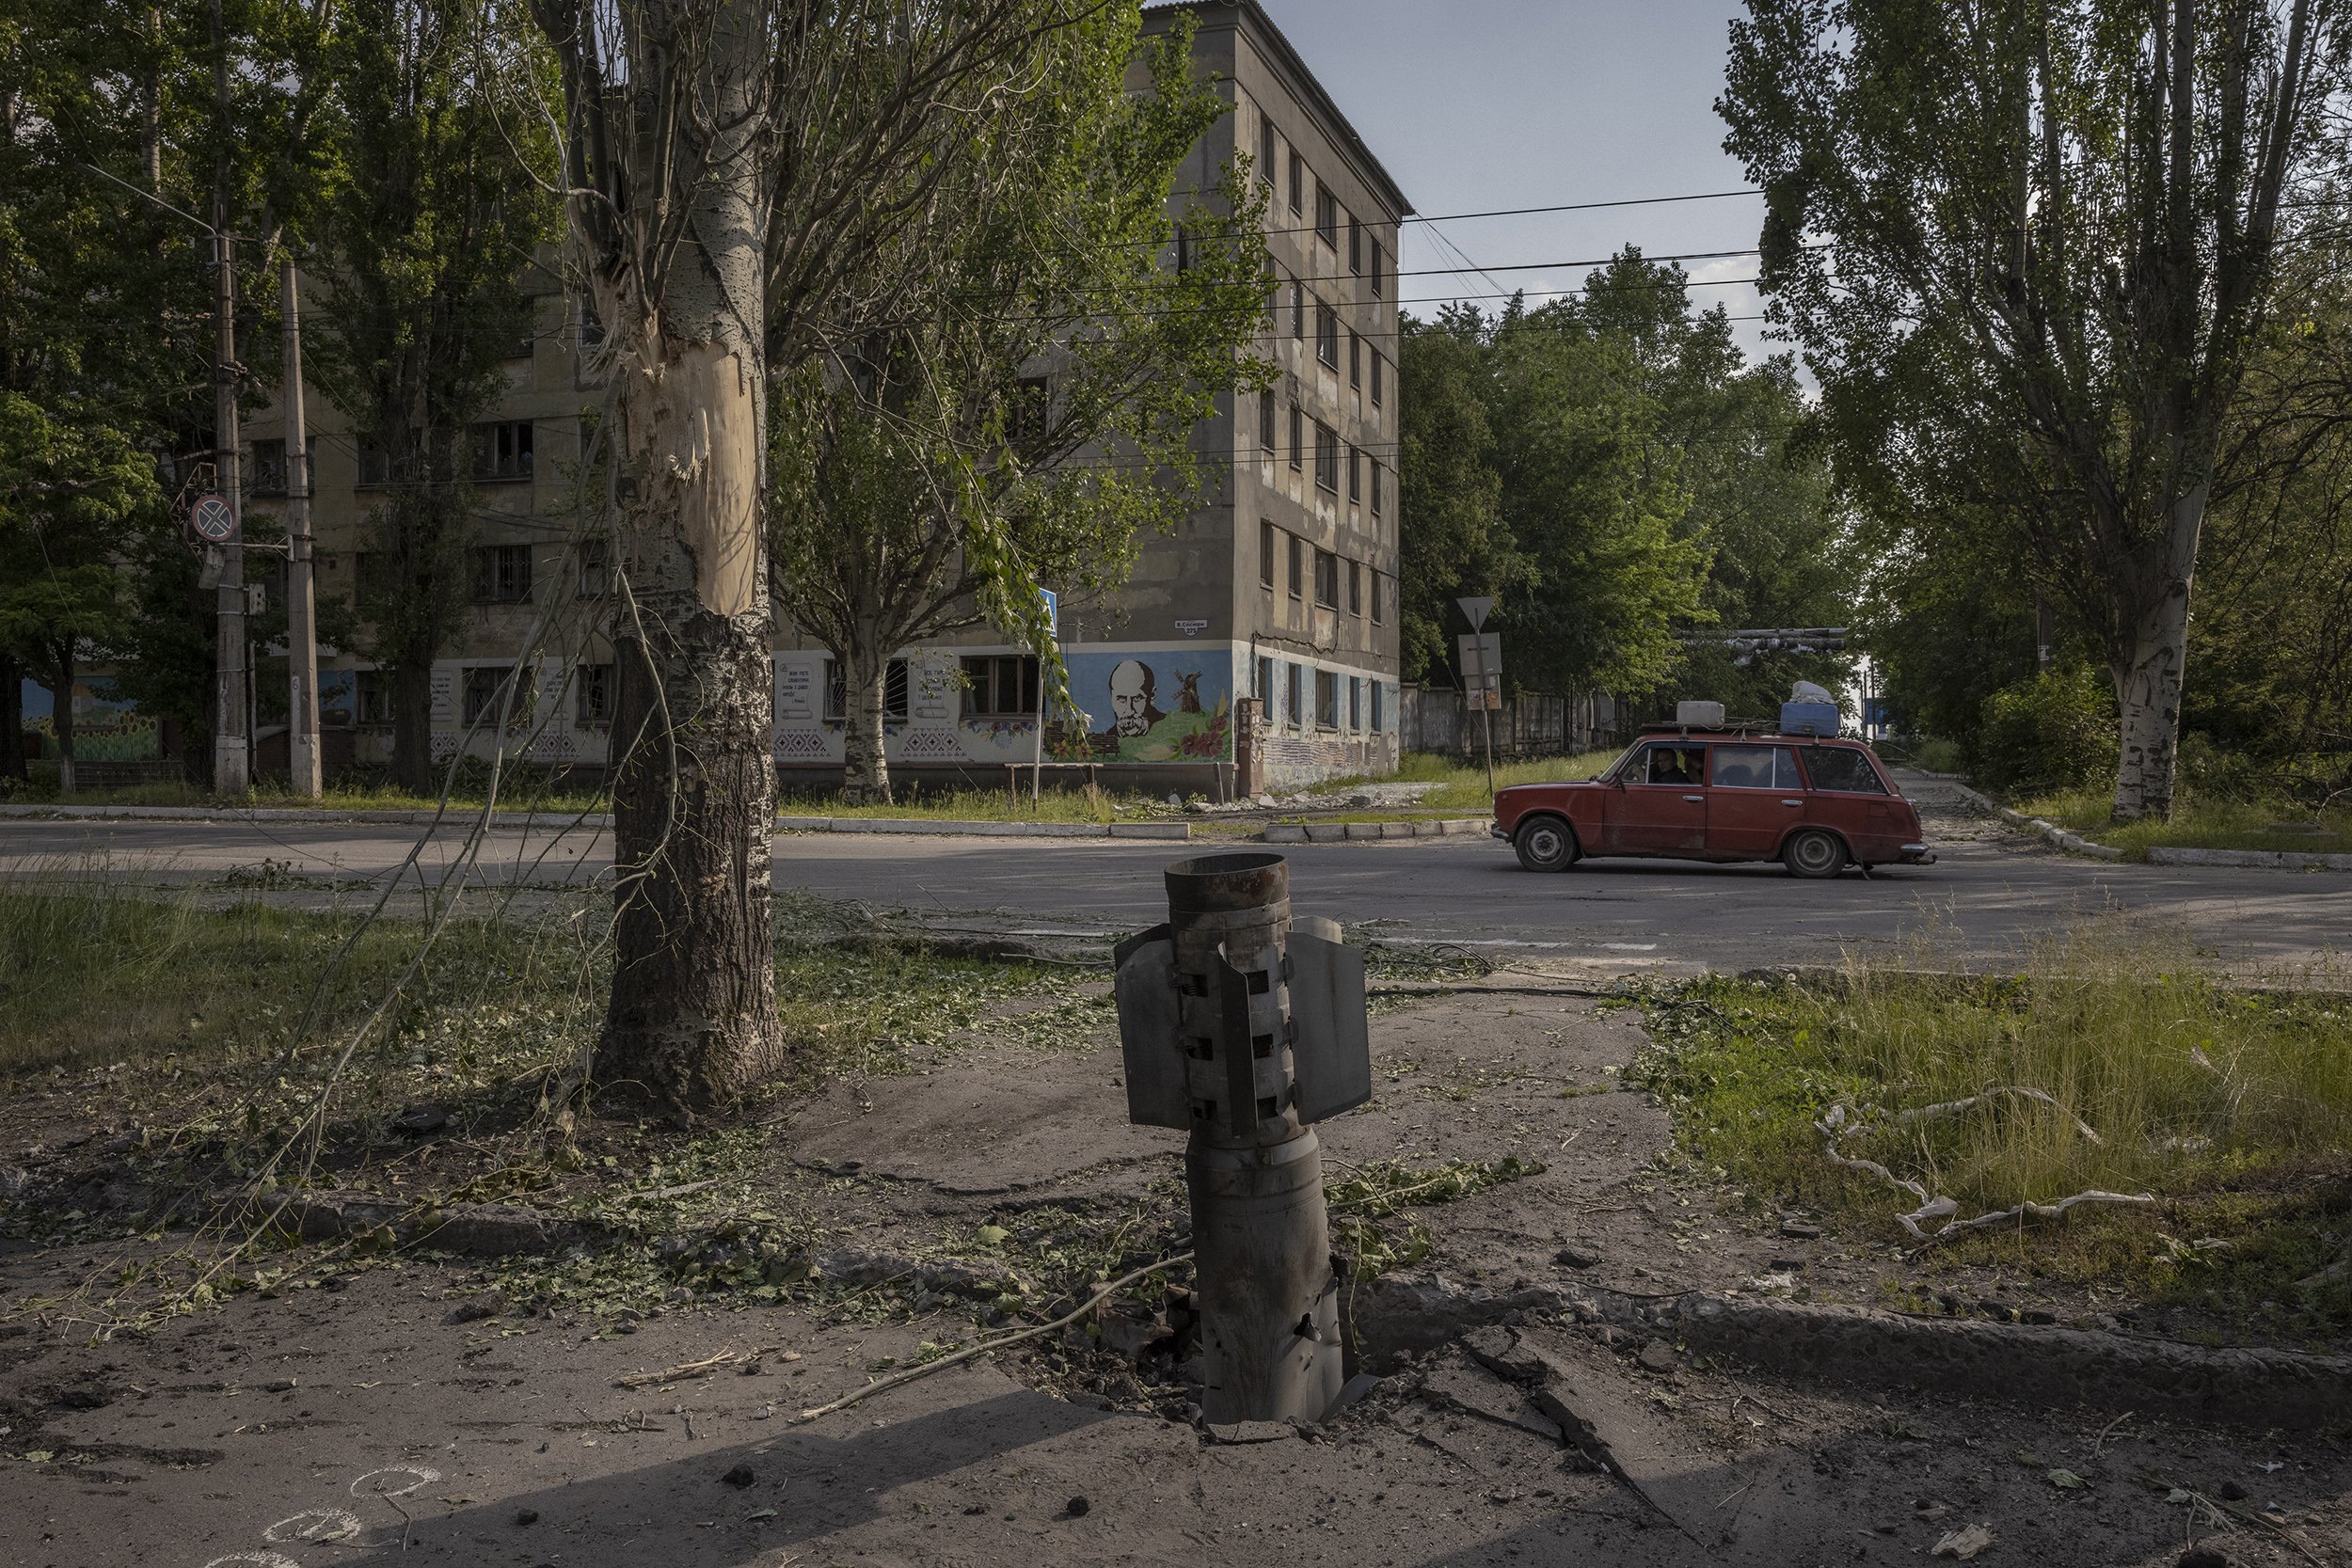  An unexploded Russian rocket protruded out of the pavement in the city of Lysychansk. June, 2022. 